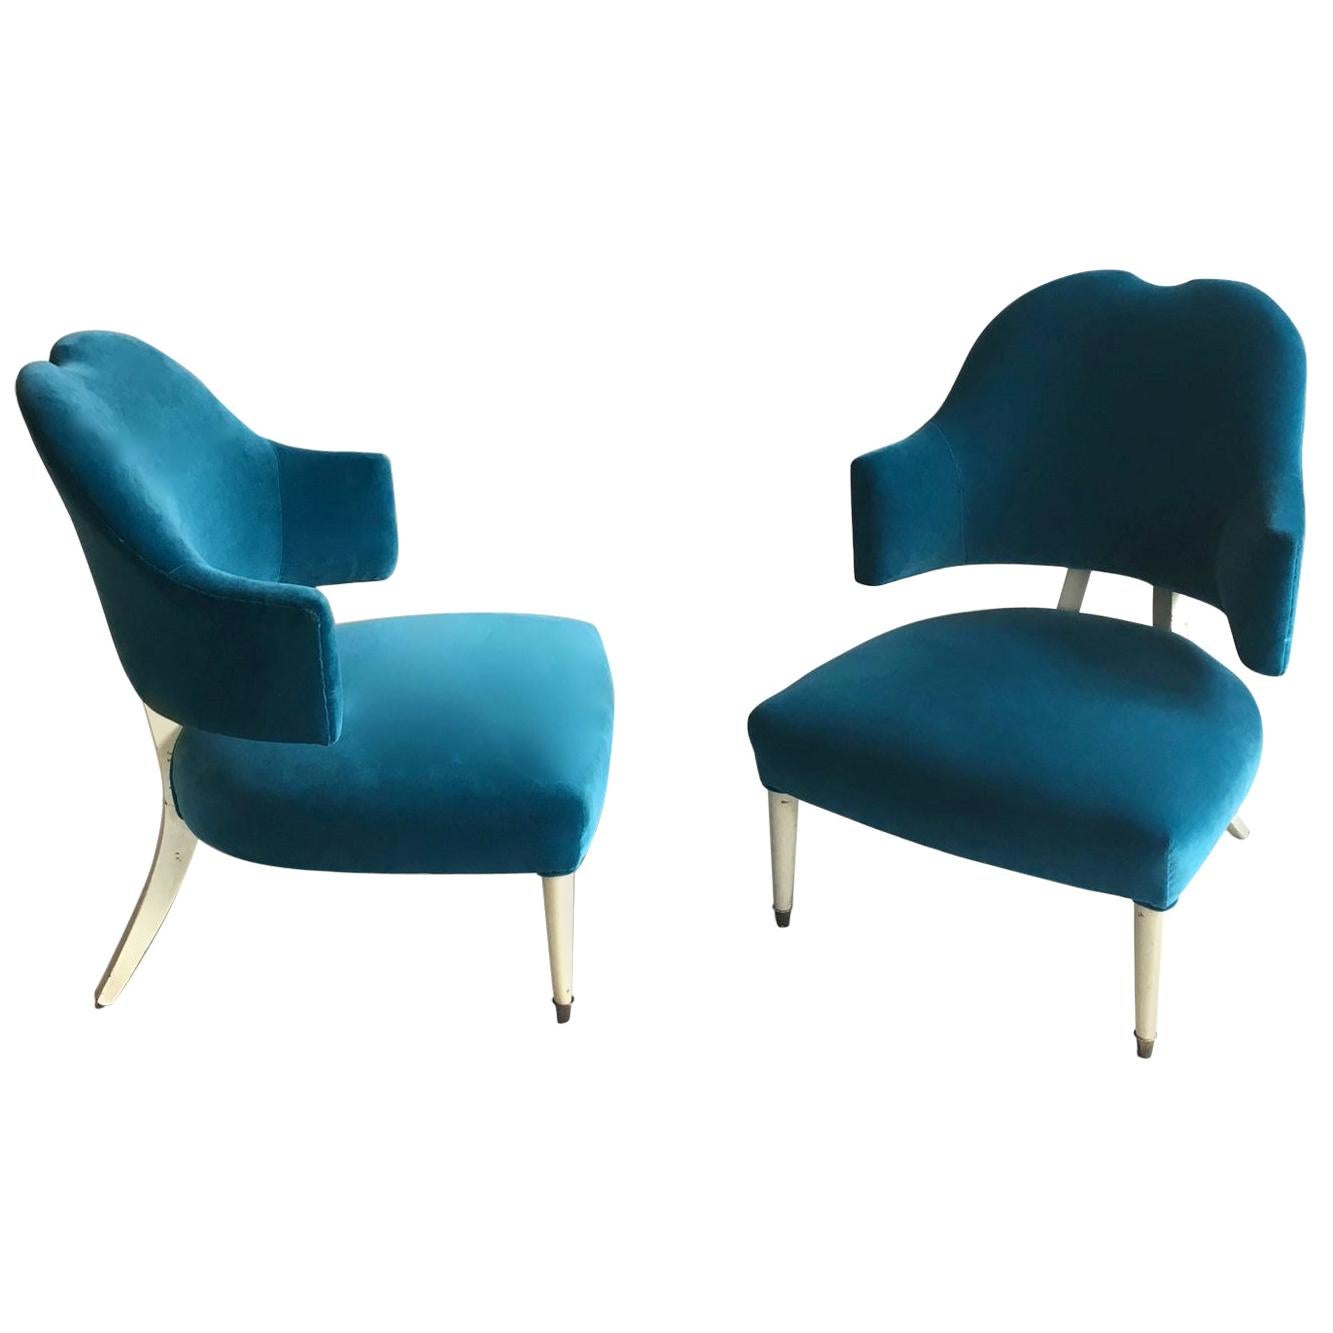 Slipper Chairs Chauffeuses Overpainted White, Blue Velour Upholstery, 1950s Pair